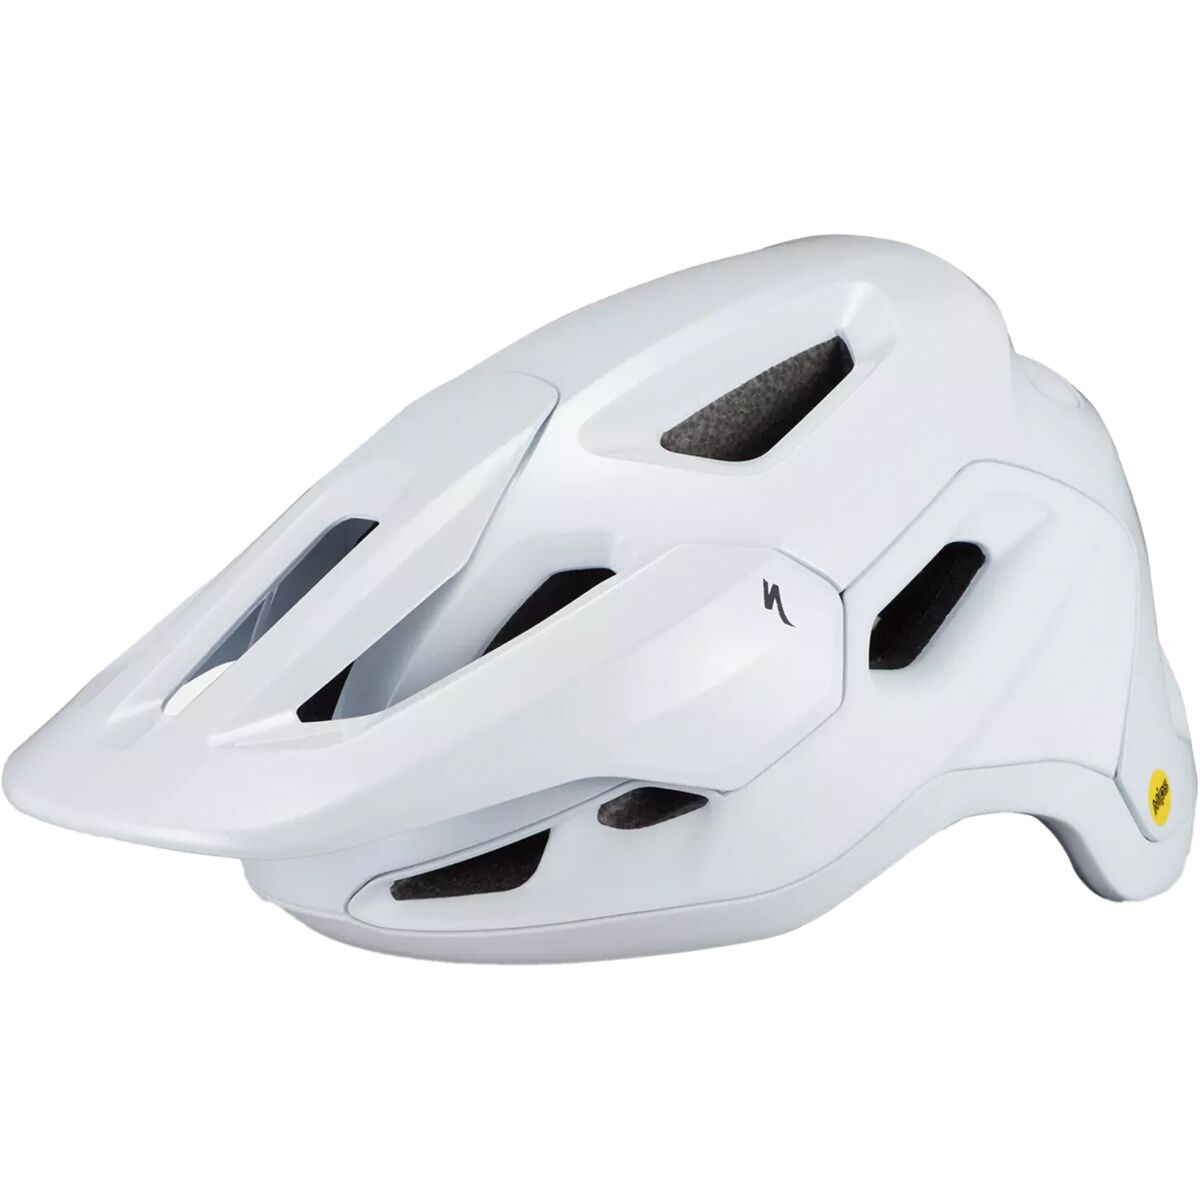 Specialized Tactic 4 Helmet Cpsc